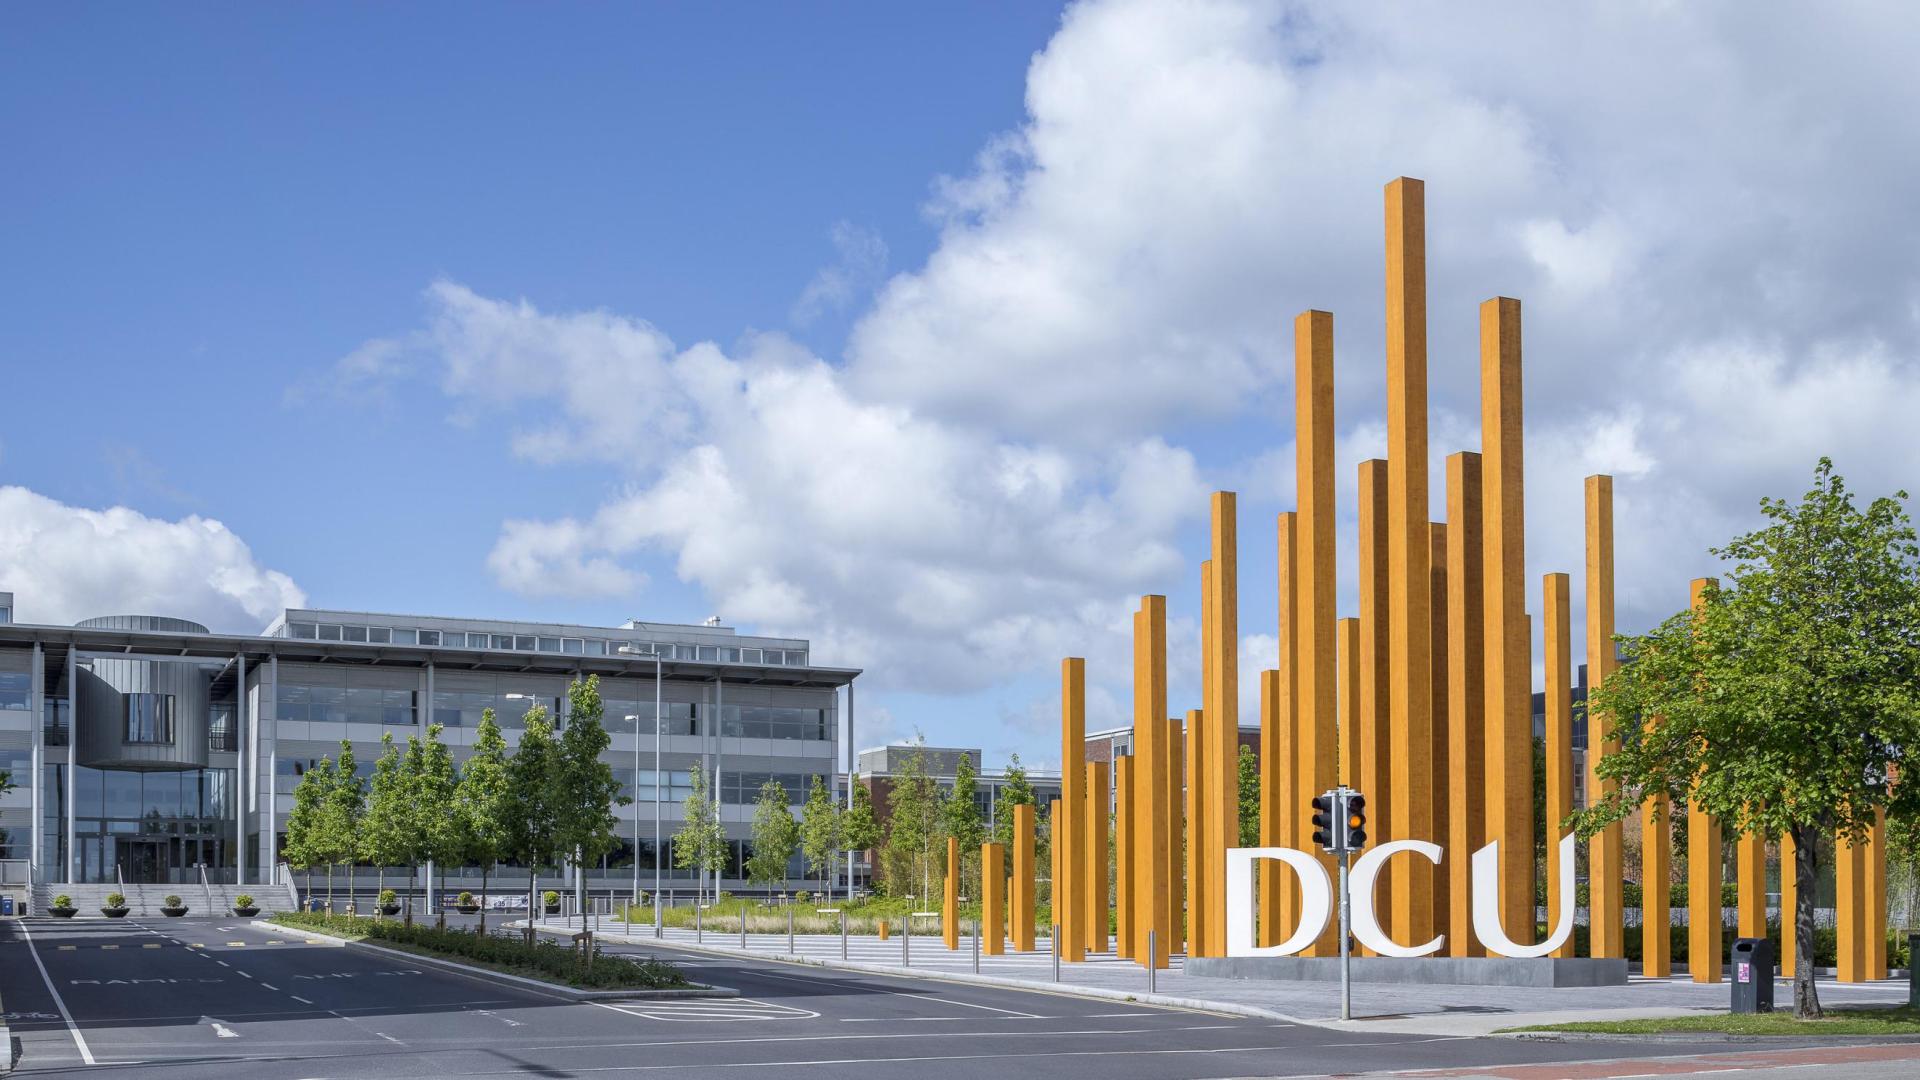 A view of DCU and it's surrounding modern buildings on a sunny day, featuring the DCU sign and the wooden sculpture next to it.